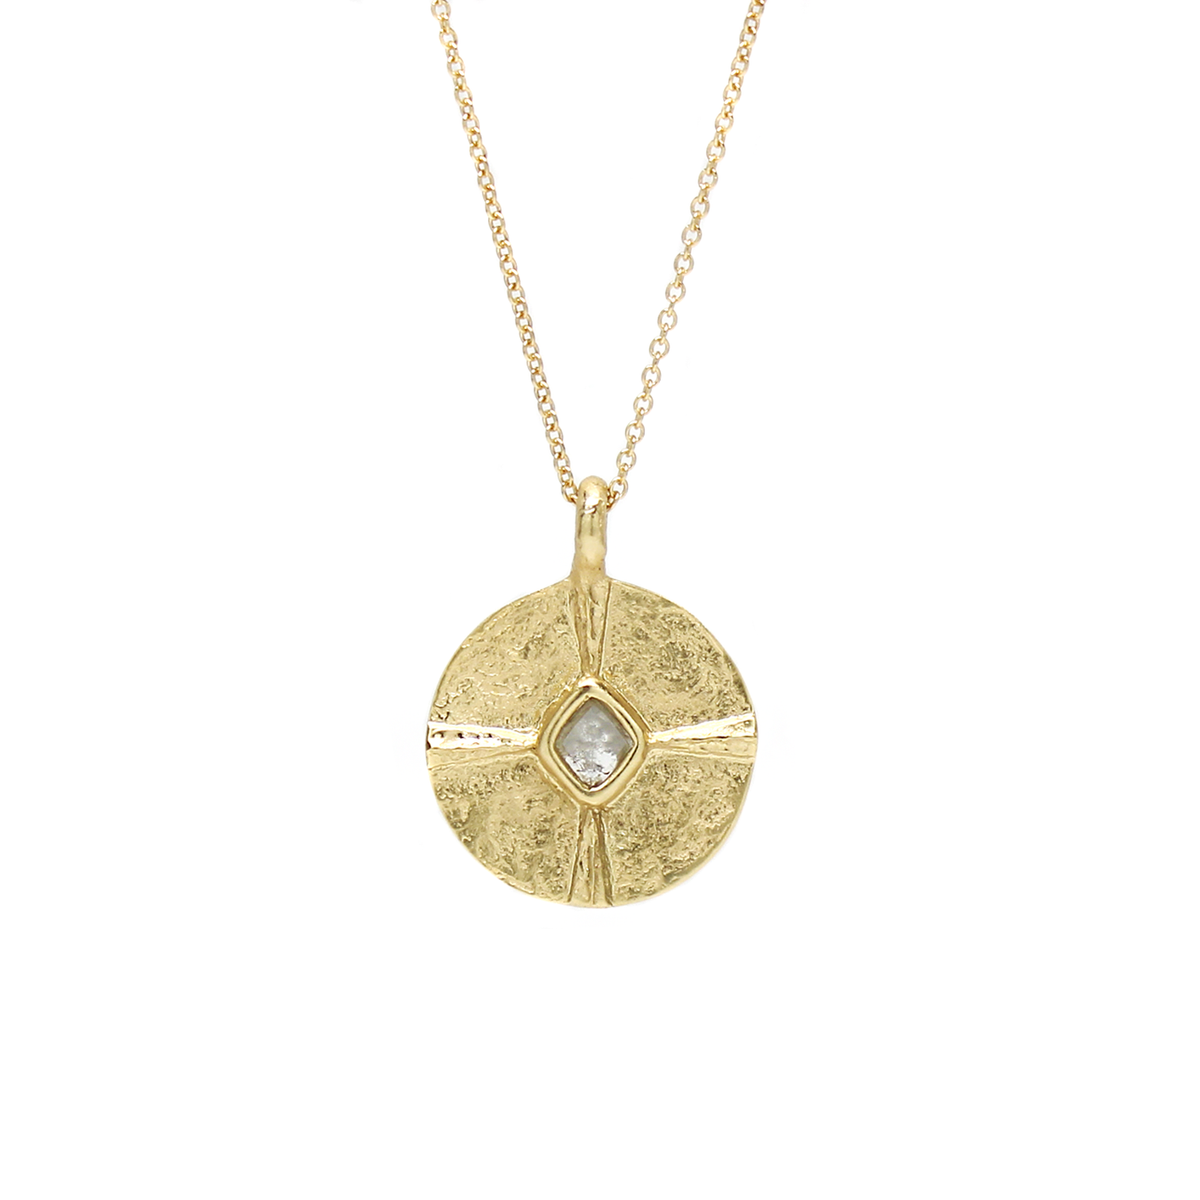 One-of-a-Kind Diamond Radial Ridge Necklace